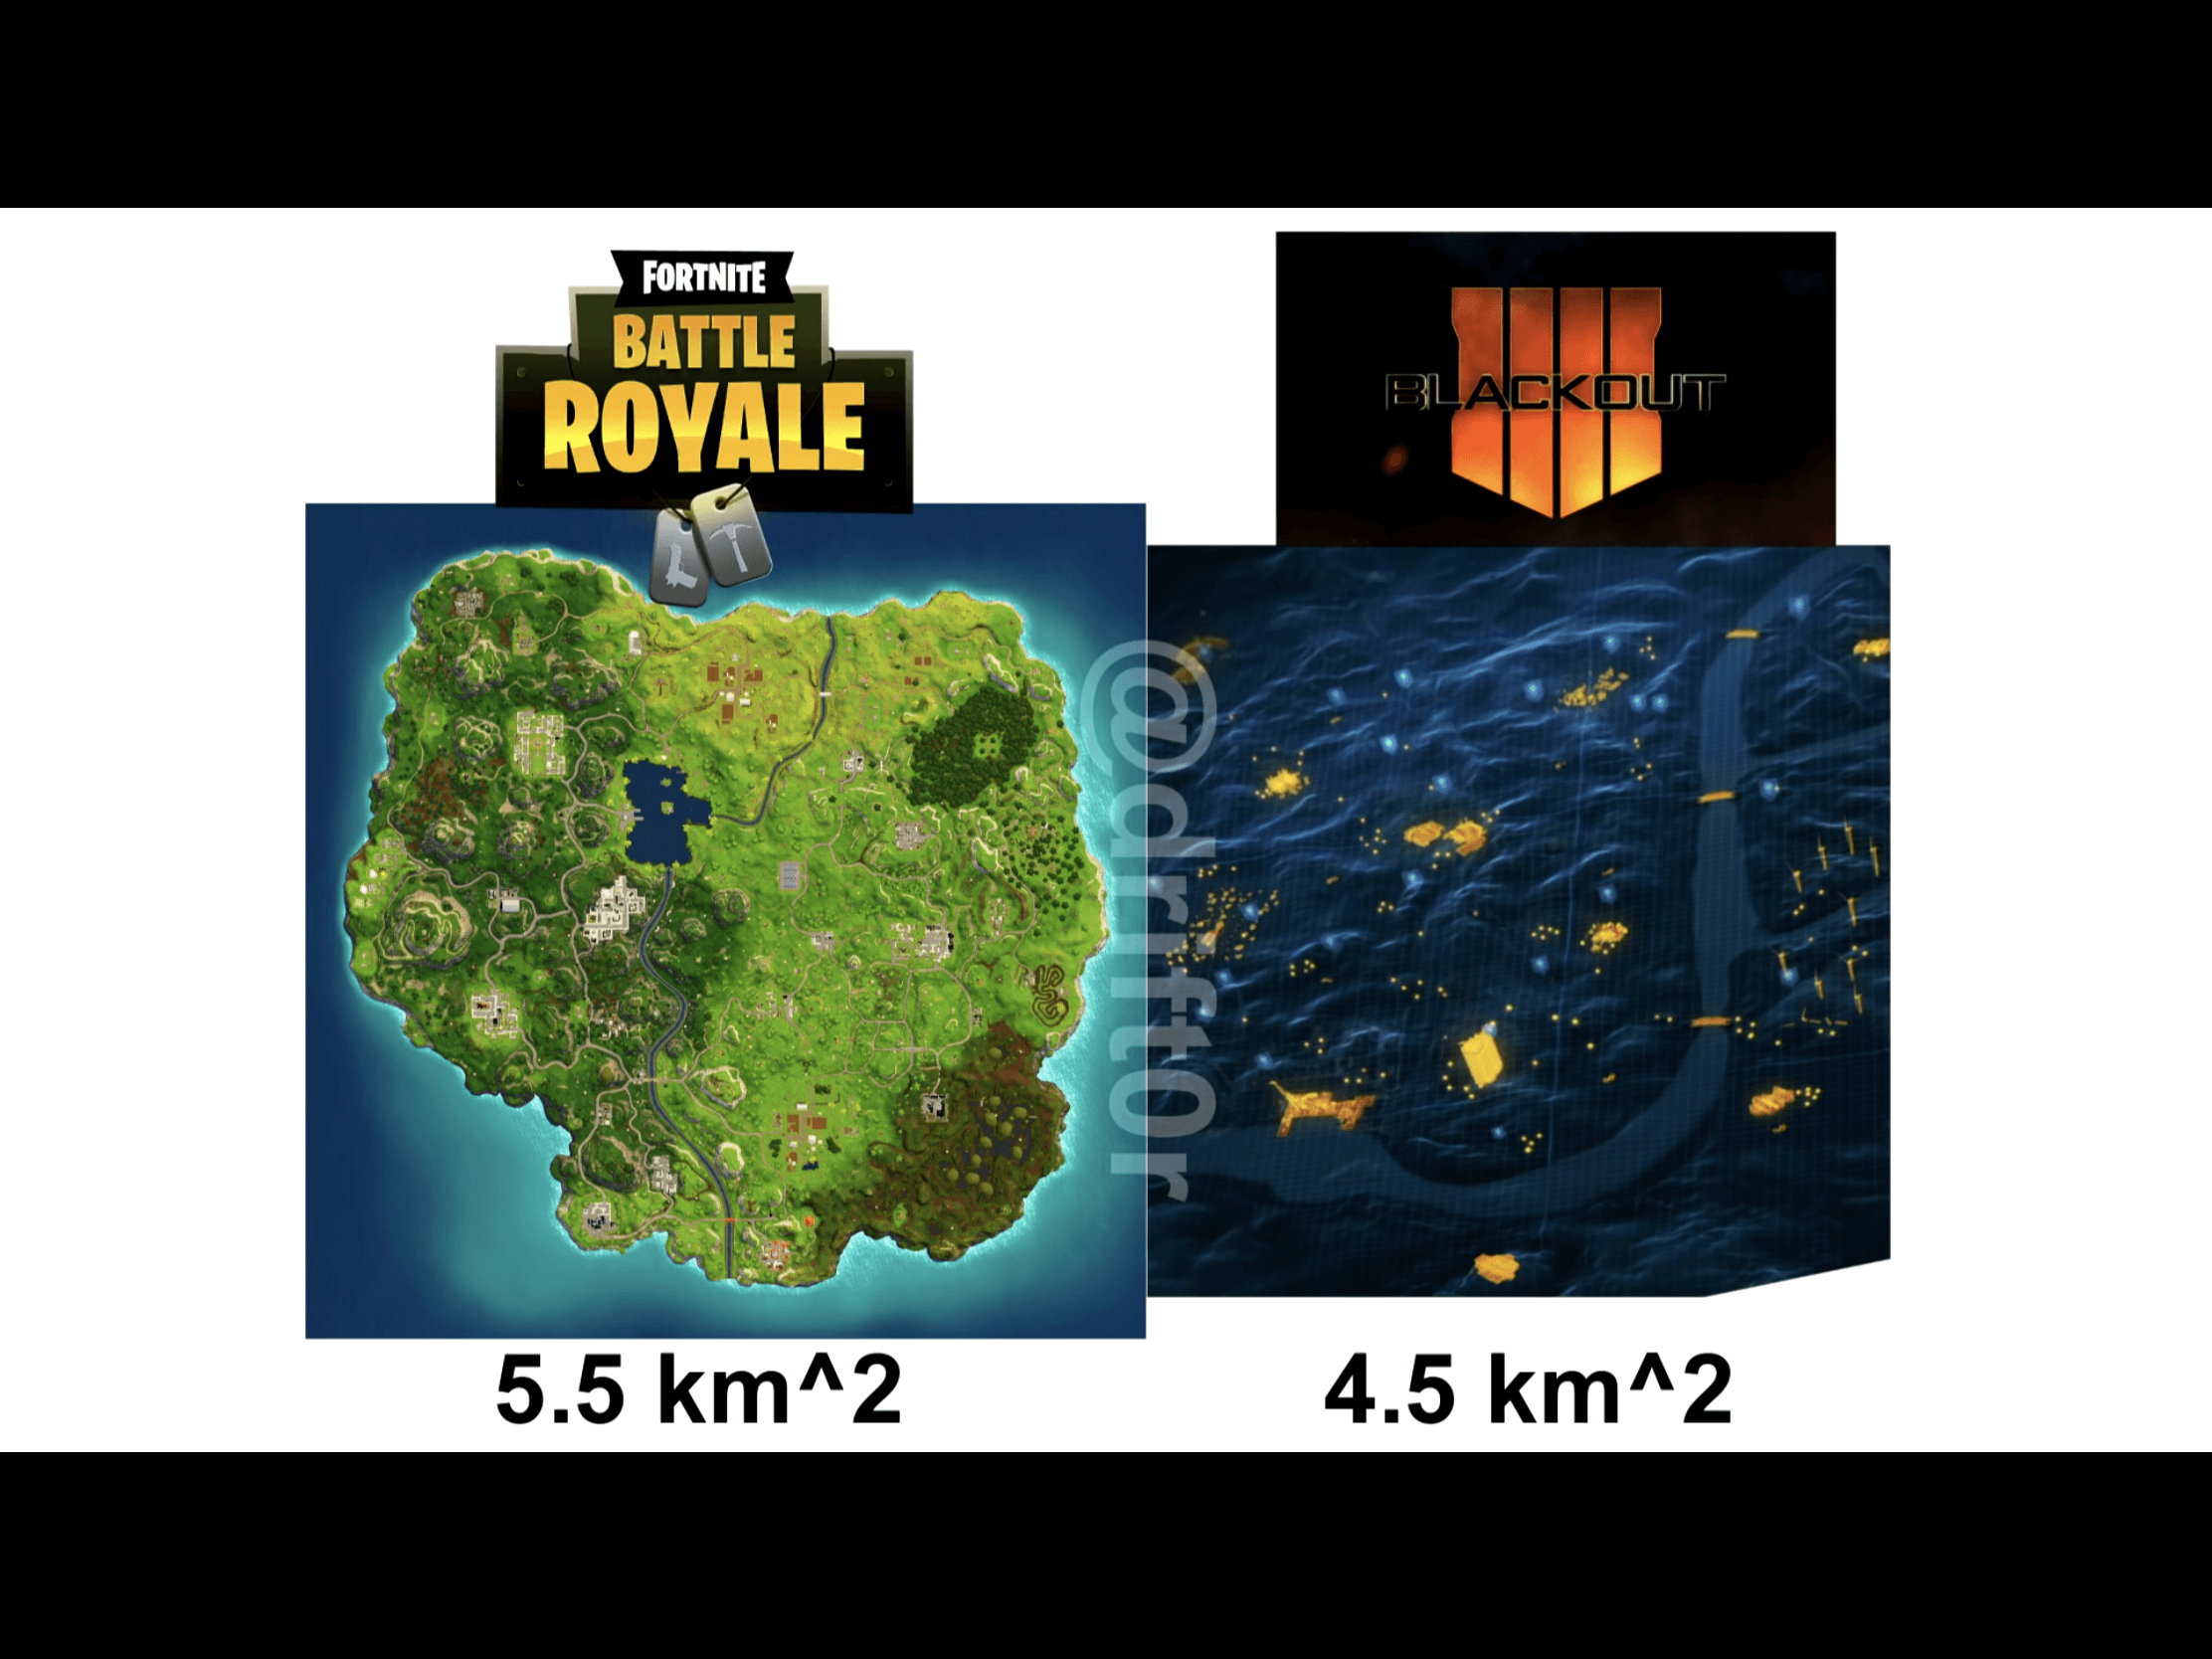 Blackout Bo4 Logo - Drift0r's Size comparison of Fortnites Map to BlackOuts map based on ...